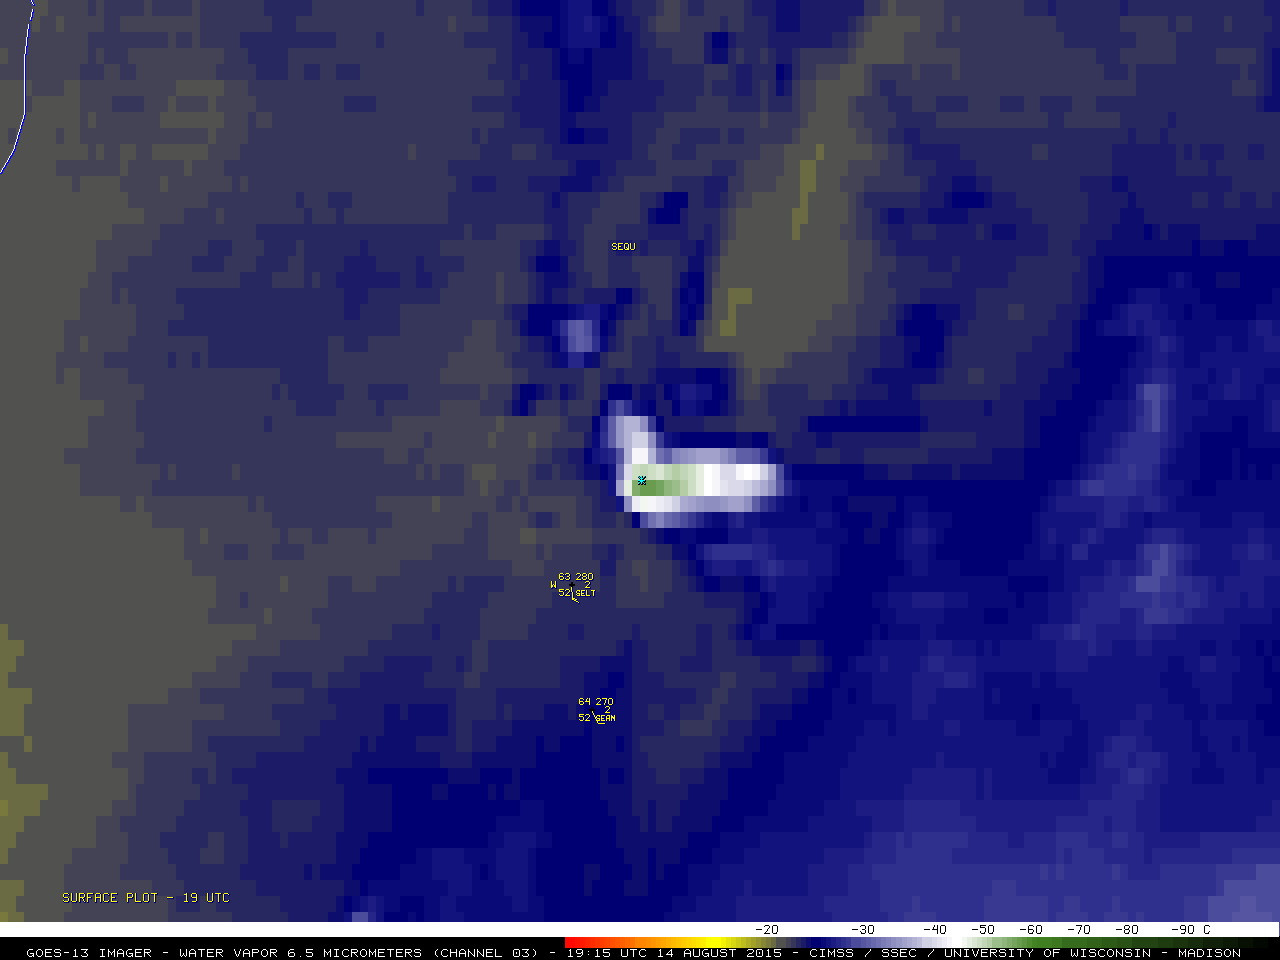  GOES-13 water vapor (6.5 µm) images [click to play animation]